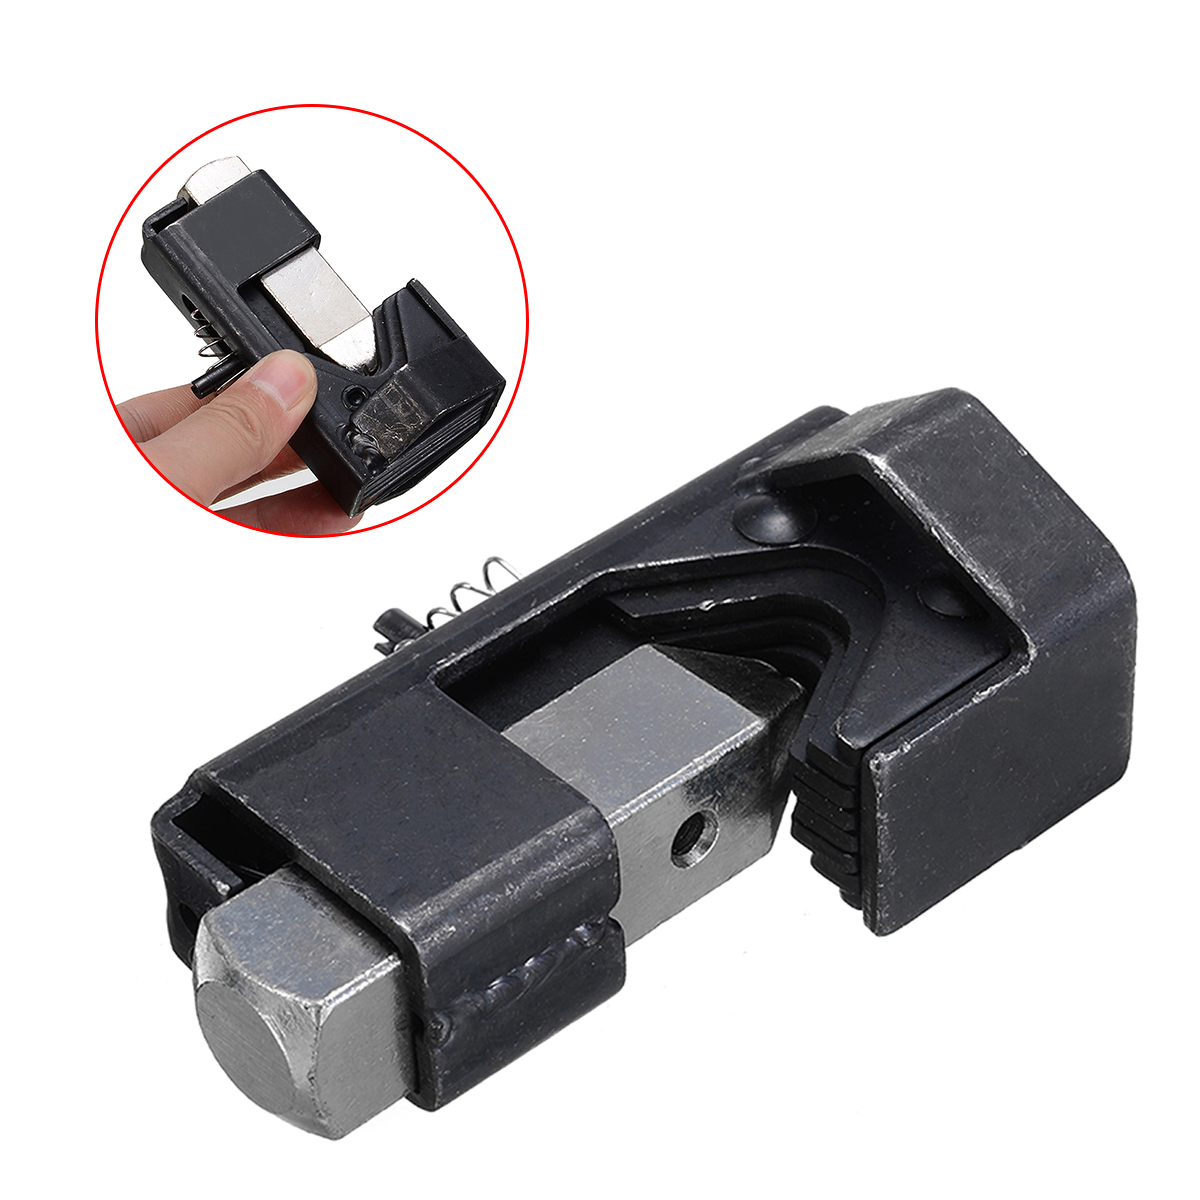 1Pcs Cable Lug Crimping Tool Battery Hammer Crimper Wire Terminal Welding Hammer Type Spring Loaded Crimping Plier Accessory